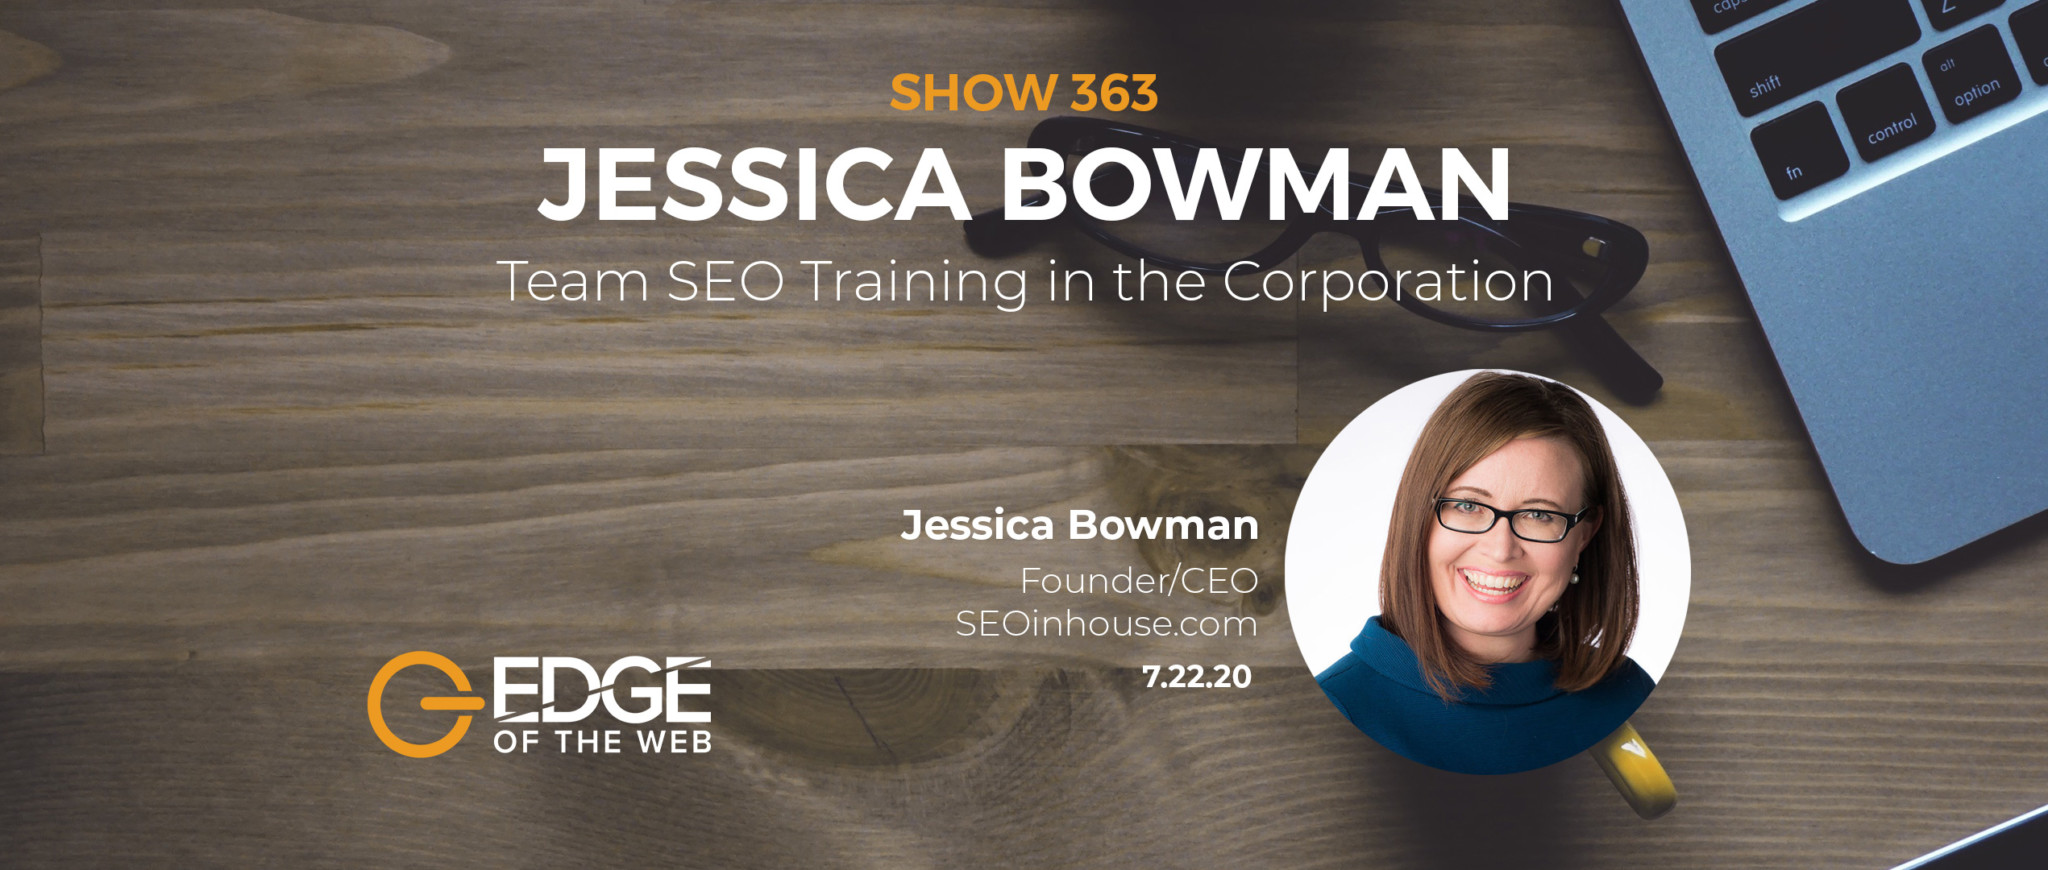 EDGE Episode 363 Featured Image of Jessica Bowman